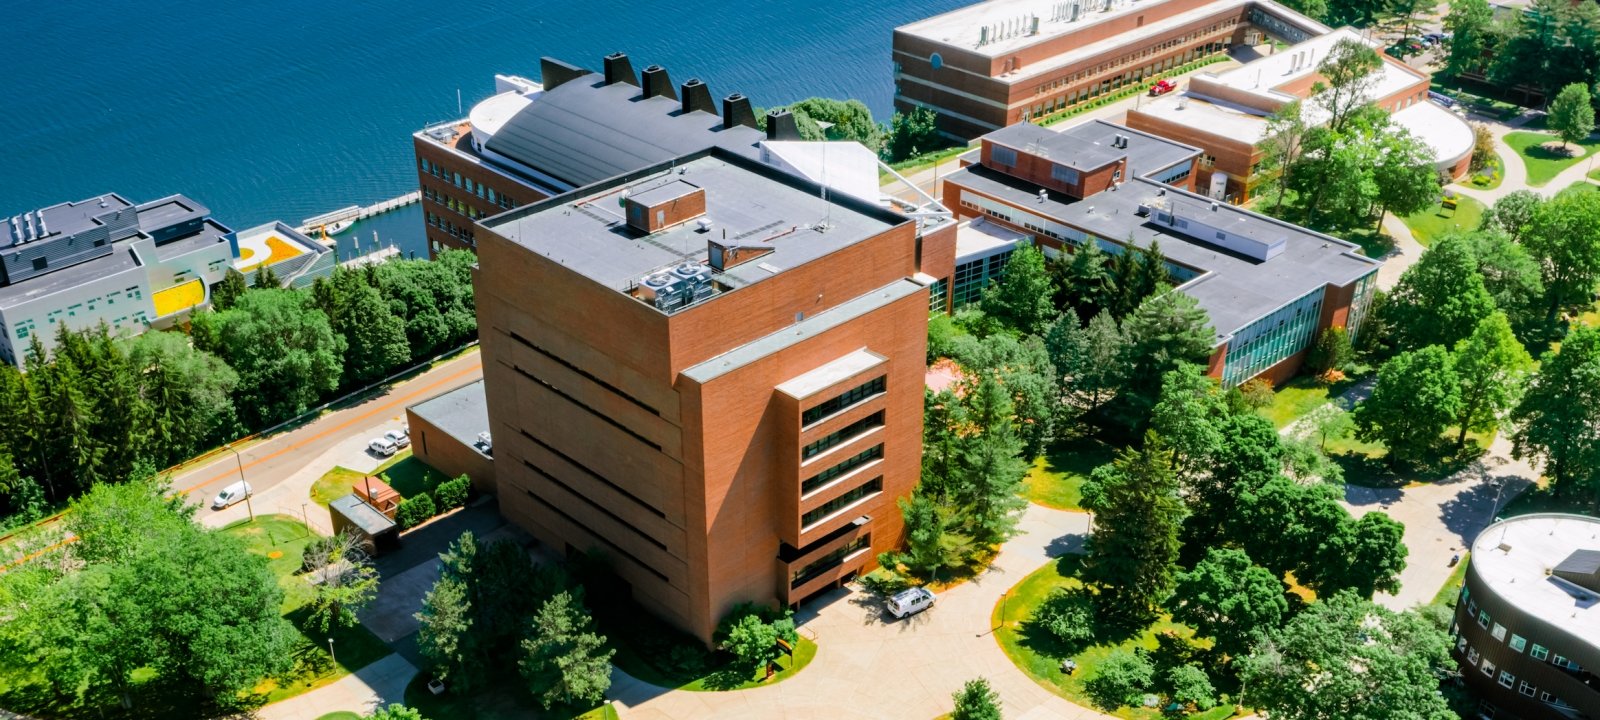 Electrical and computer engineering building in summer from an aerial view.